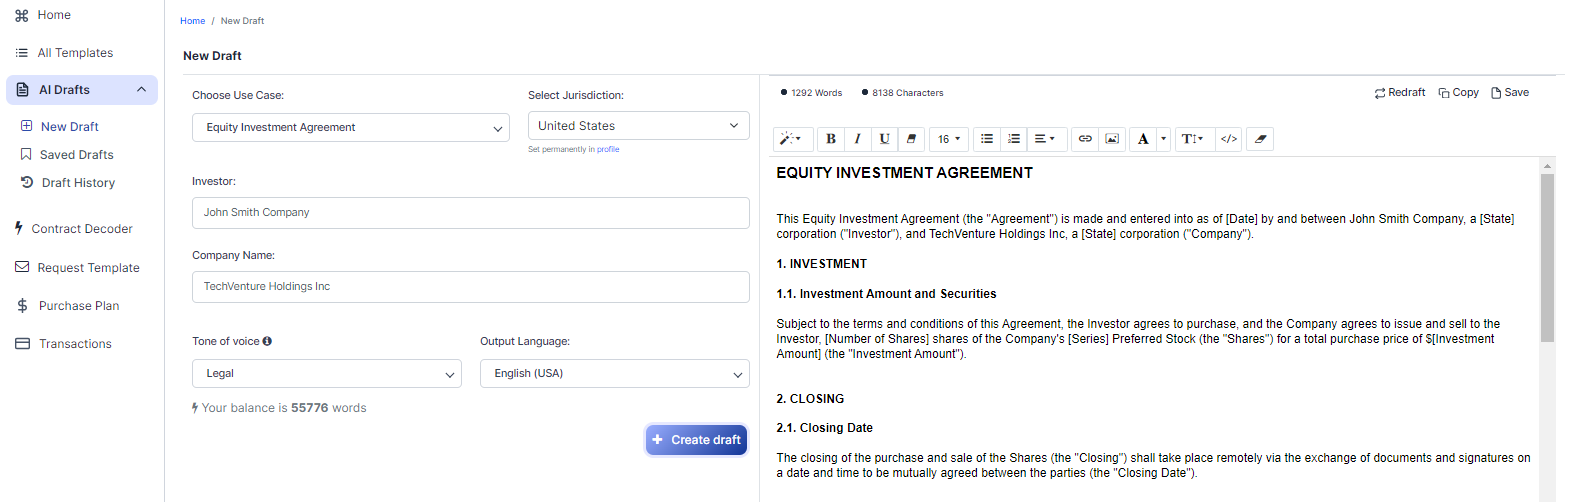 Equity Investment Agreement template